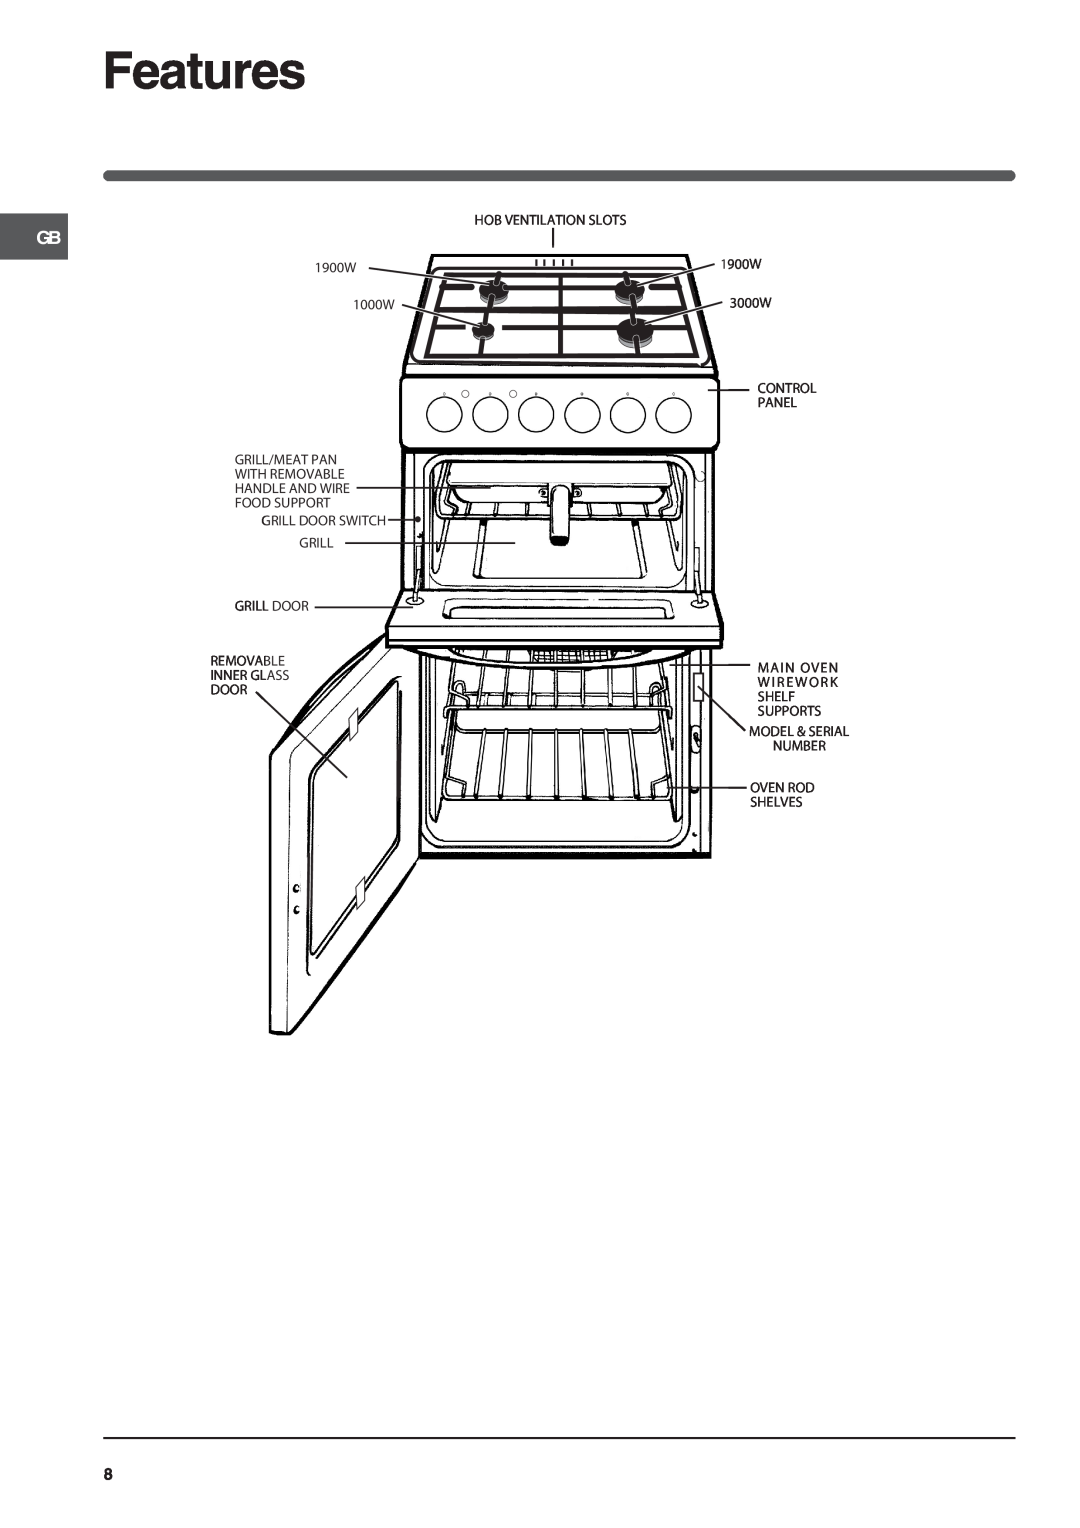 Indesit KD3G11S/G manual Features, Hob Ventilation Slots, 1900W 1000W GRILL/MEAT PAN WITH REMOVABLE HANDLE AND WIRE, Door 